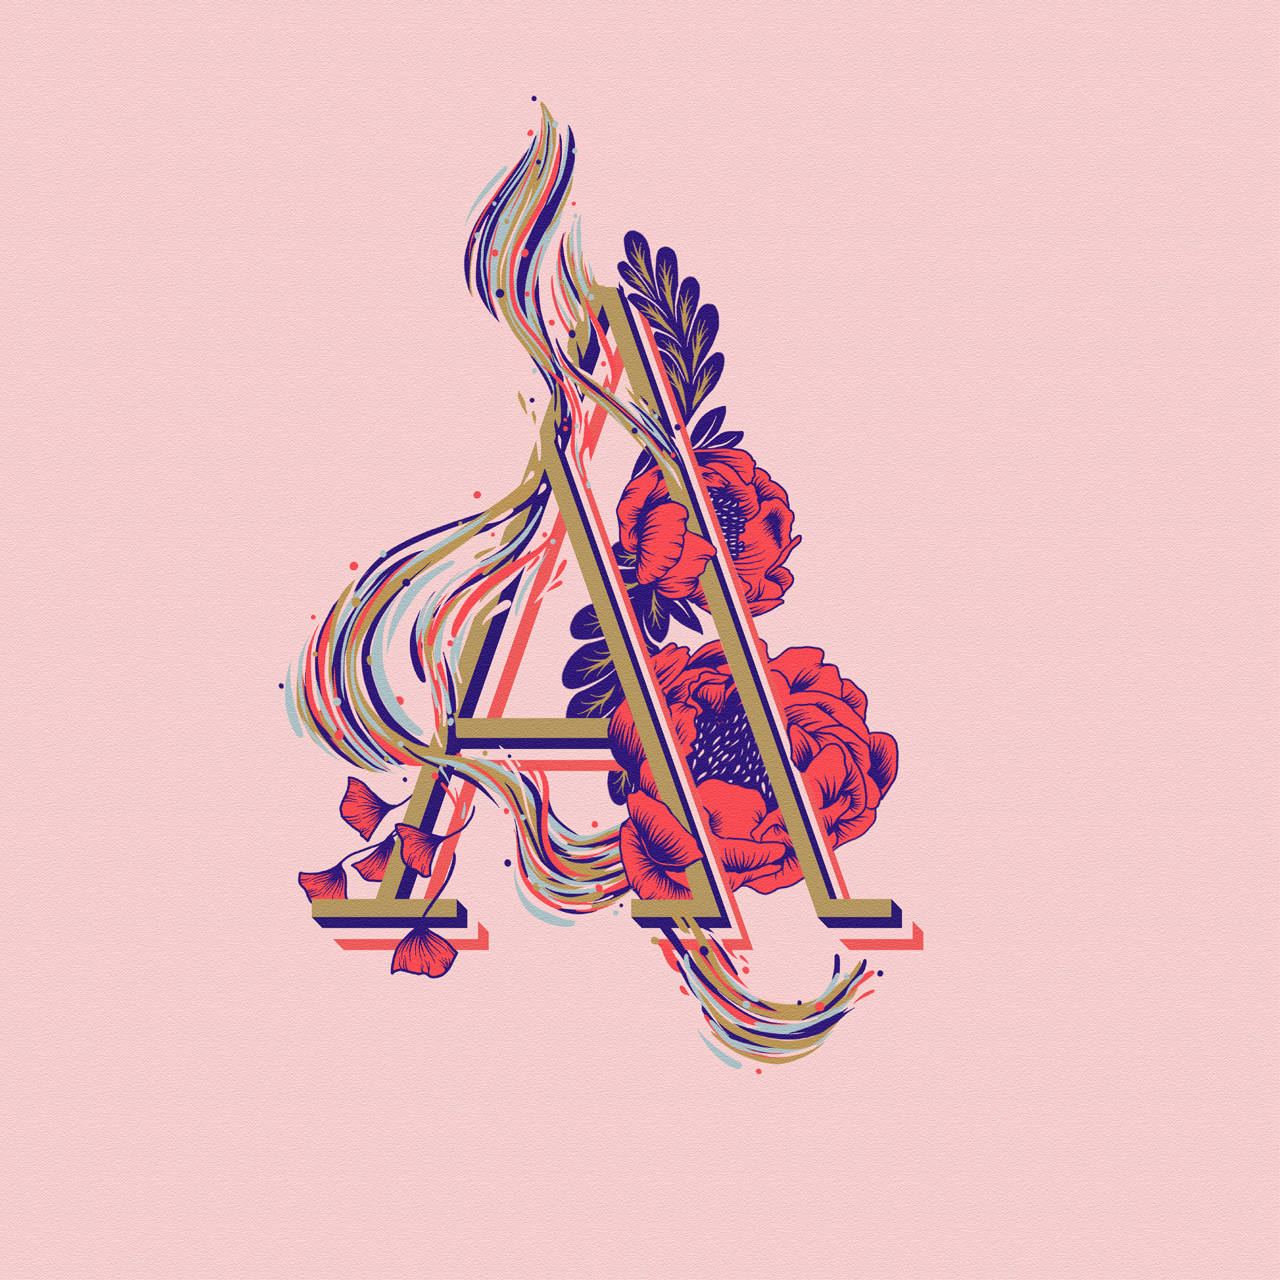 Capital Alphabet Letter A With Flowing Effect And Flowers Background